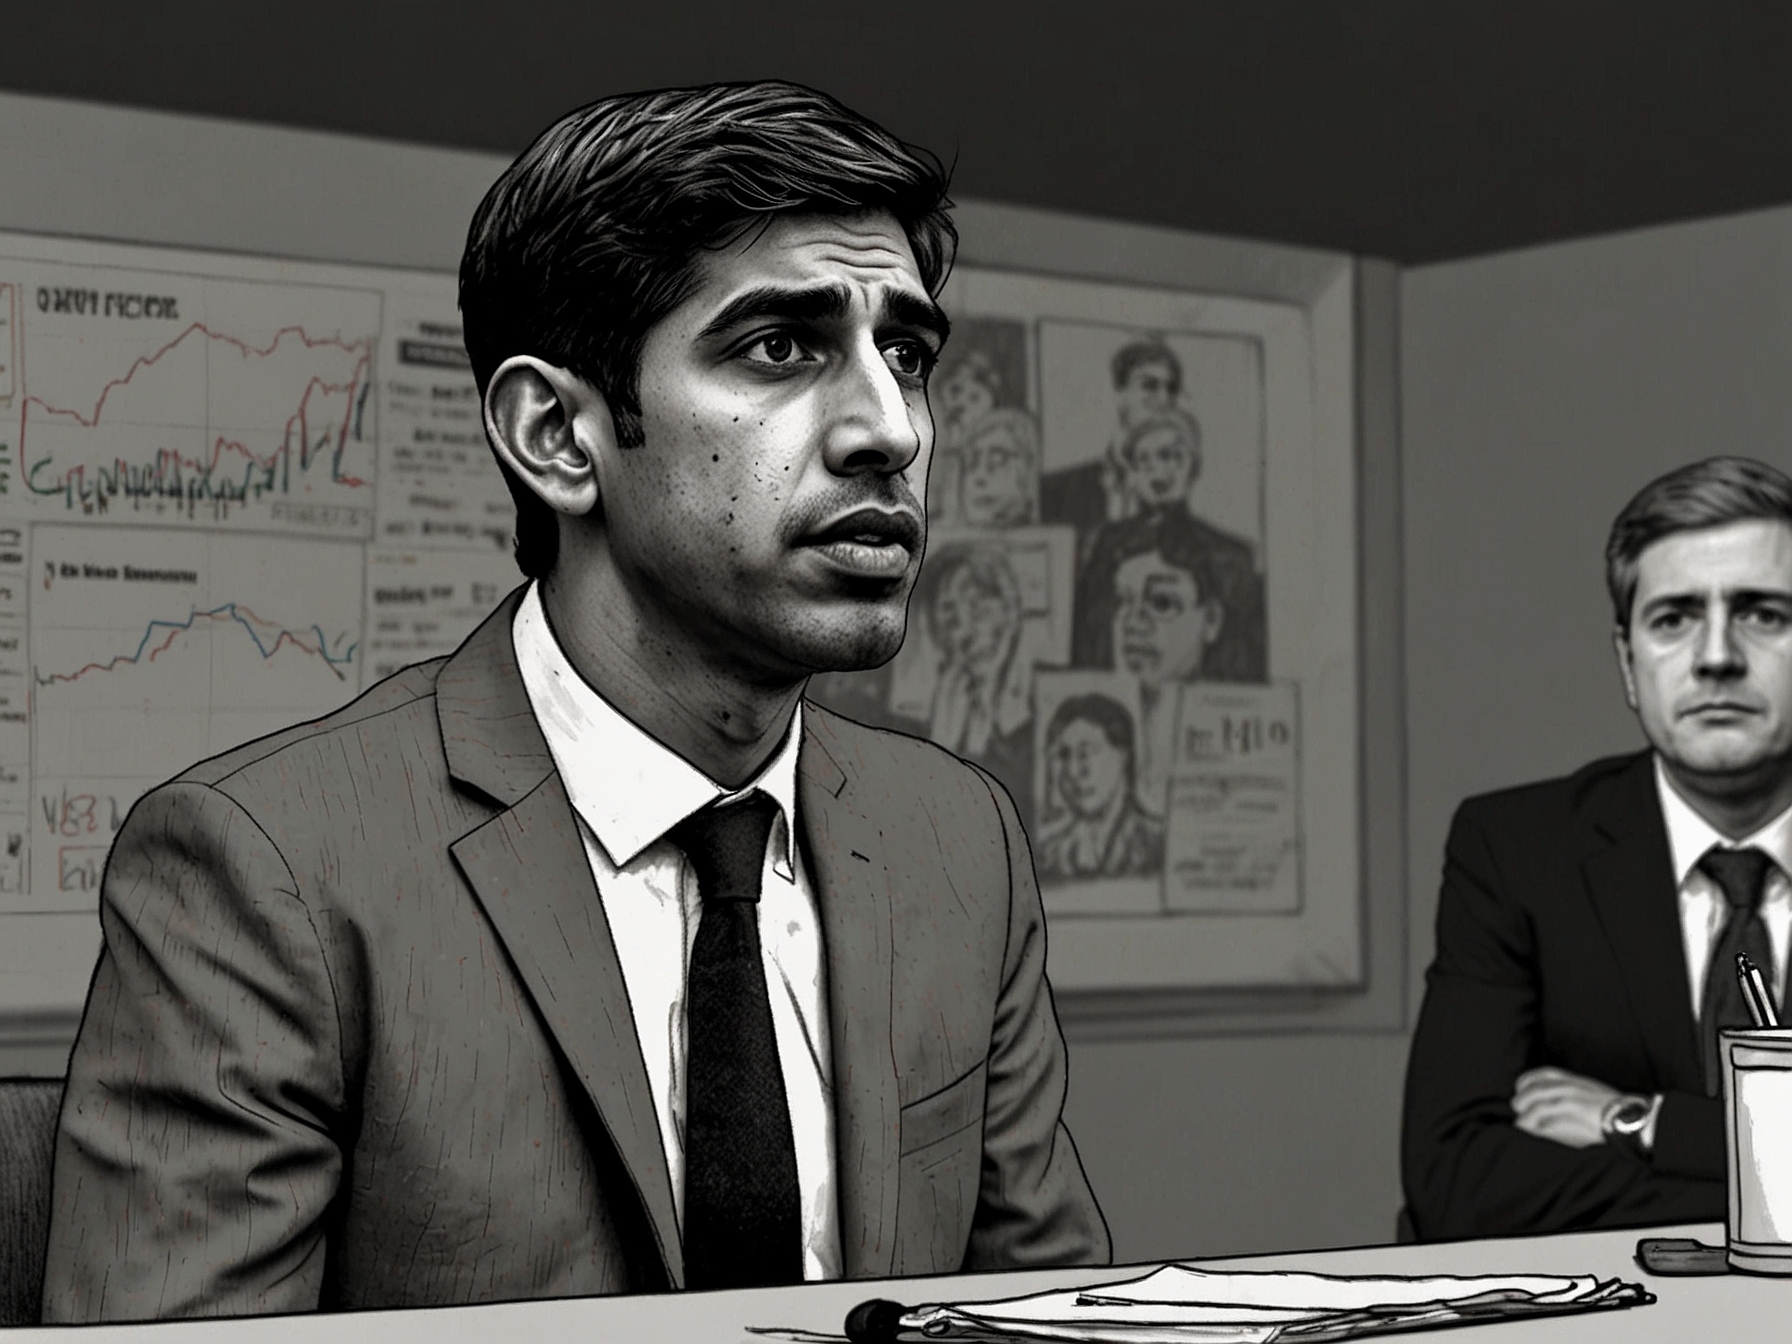 An illustration of Prime Minister Rishi Sunak at a press conference, looking stressed and defensive as journalists bombard him with questions about the betting scandal shaking the Conservative Party.